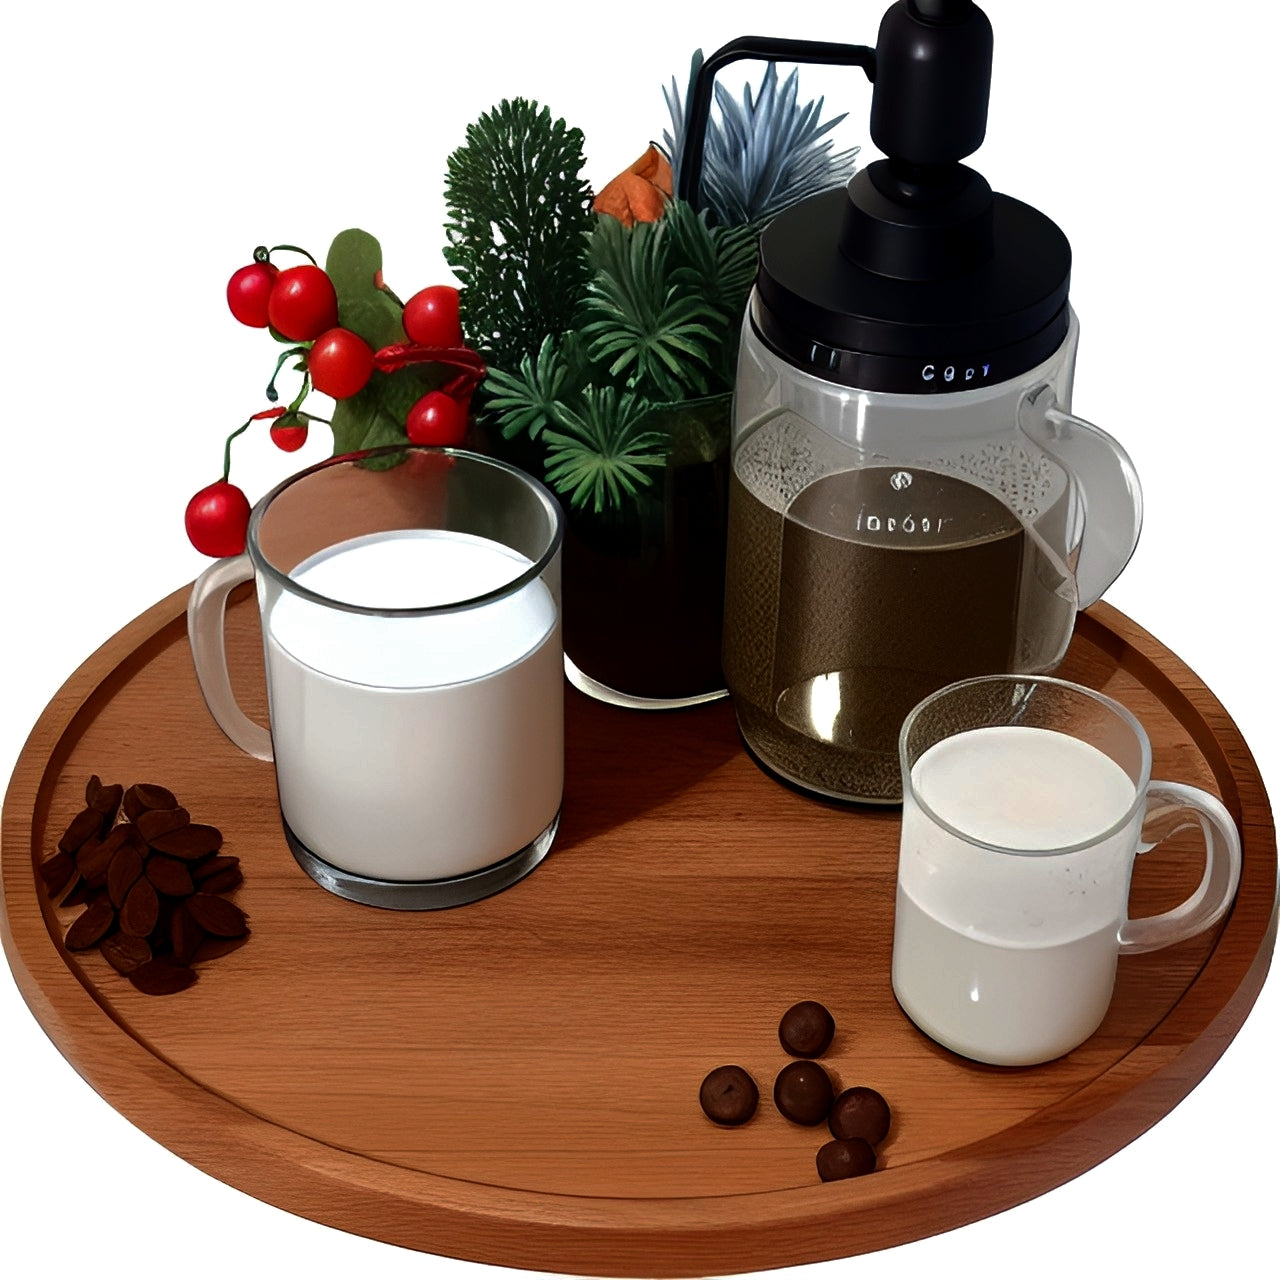 Round Wooden multipurpose Tray for Coffee Table, Small Wooden Serving Tray, Decorative Trays for Home Decor - 3 Sizes 11, 8.5, 6 inches (11 x 11 inches, Natural) Dime Store